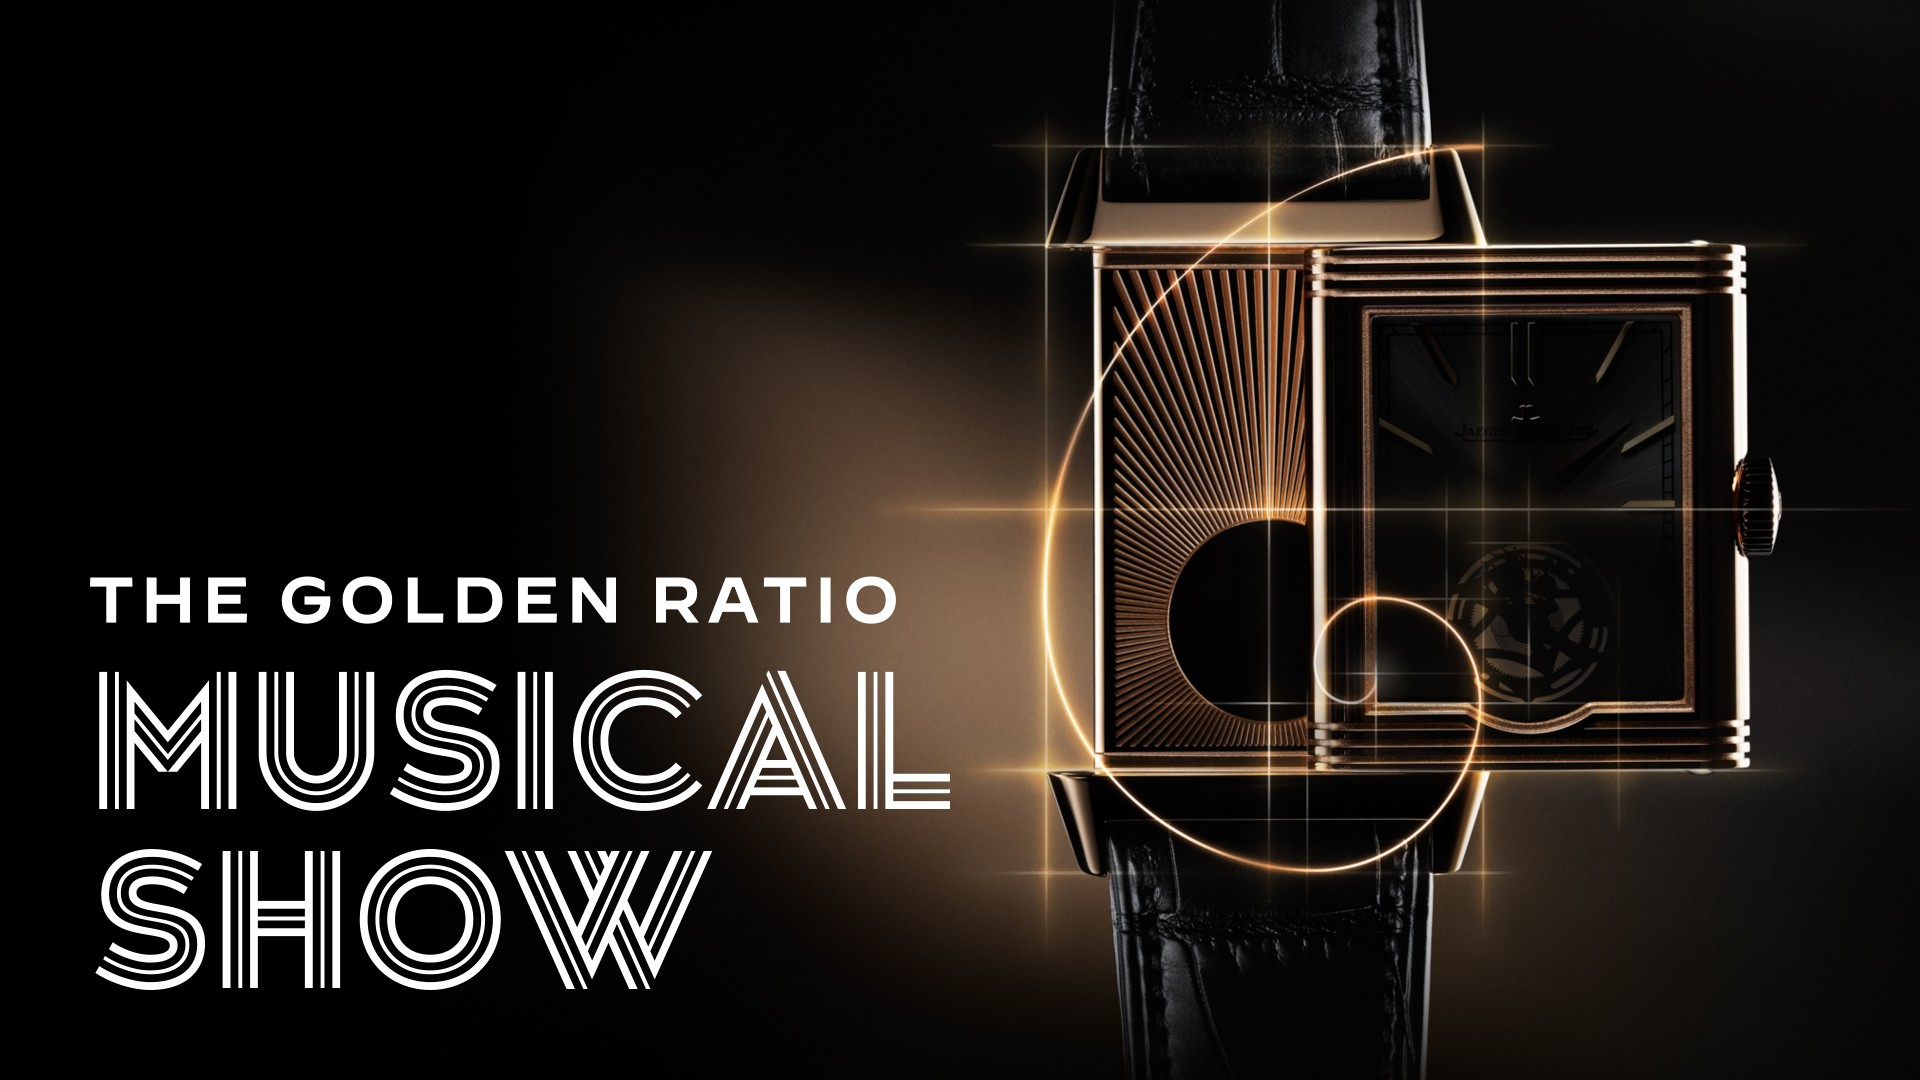 Jaeger-LeCoultre The Golden Ratio Musical Show, Los Angeles